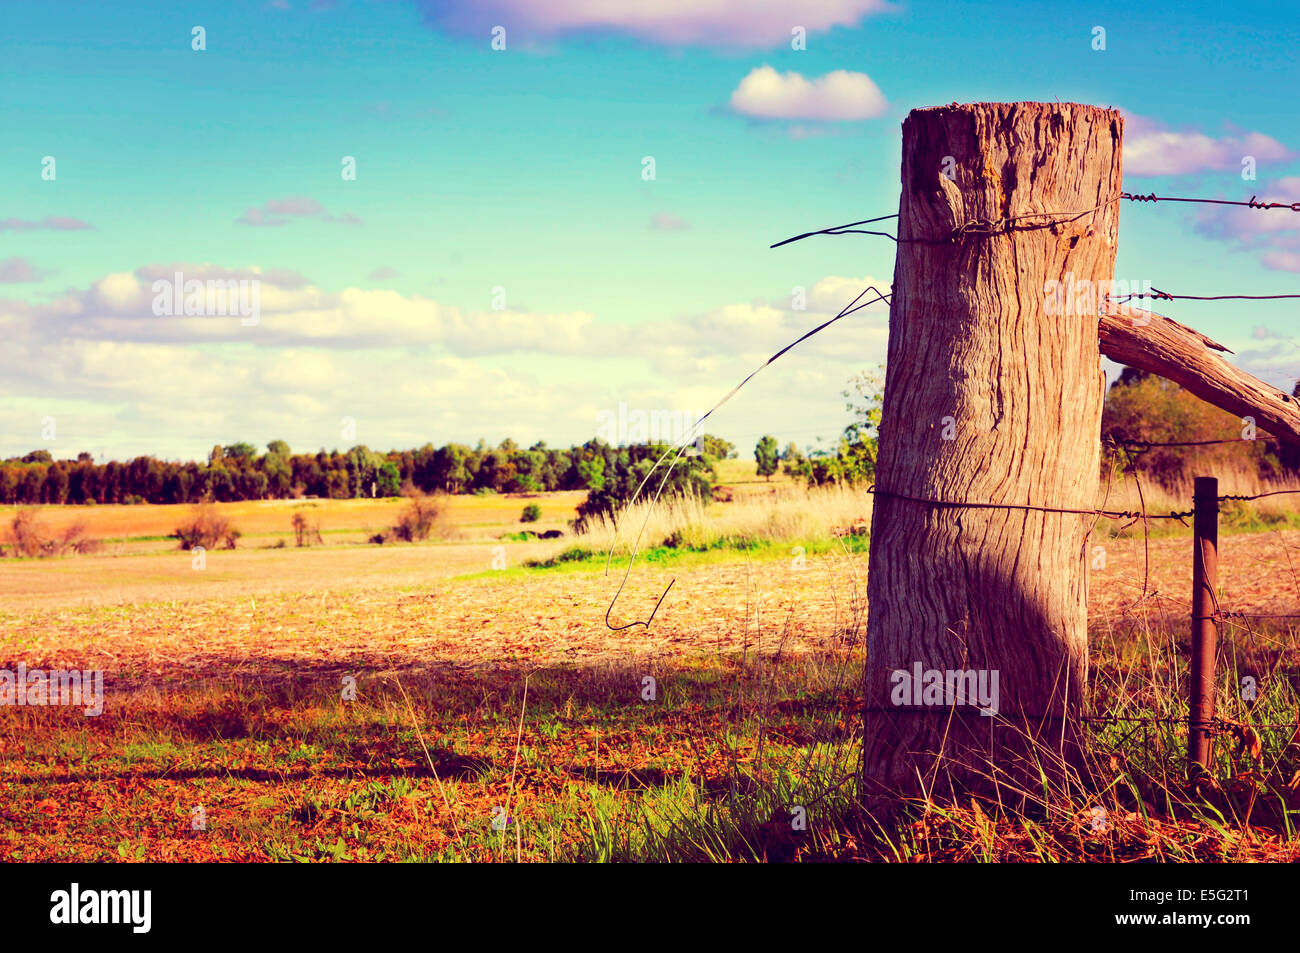 Retro sunset filter style country side scene with old gate post and barb wire. Taken at Barossa Valley, South Australia. Stock Photo